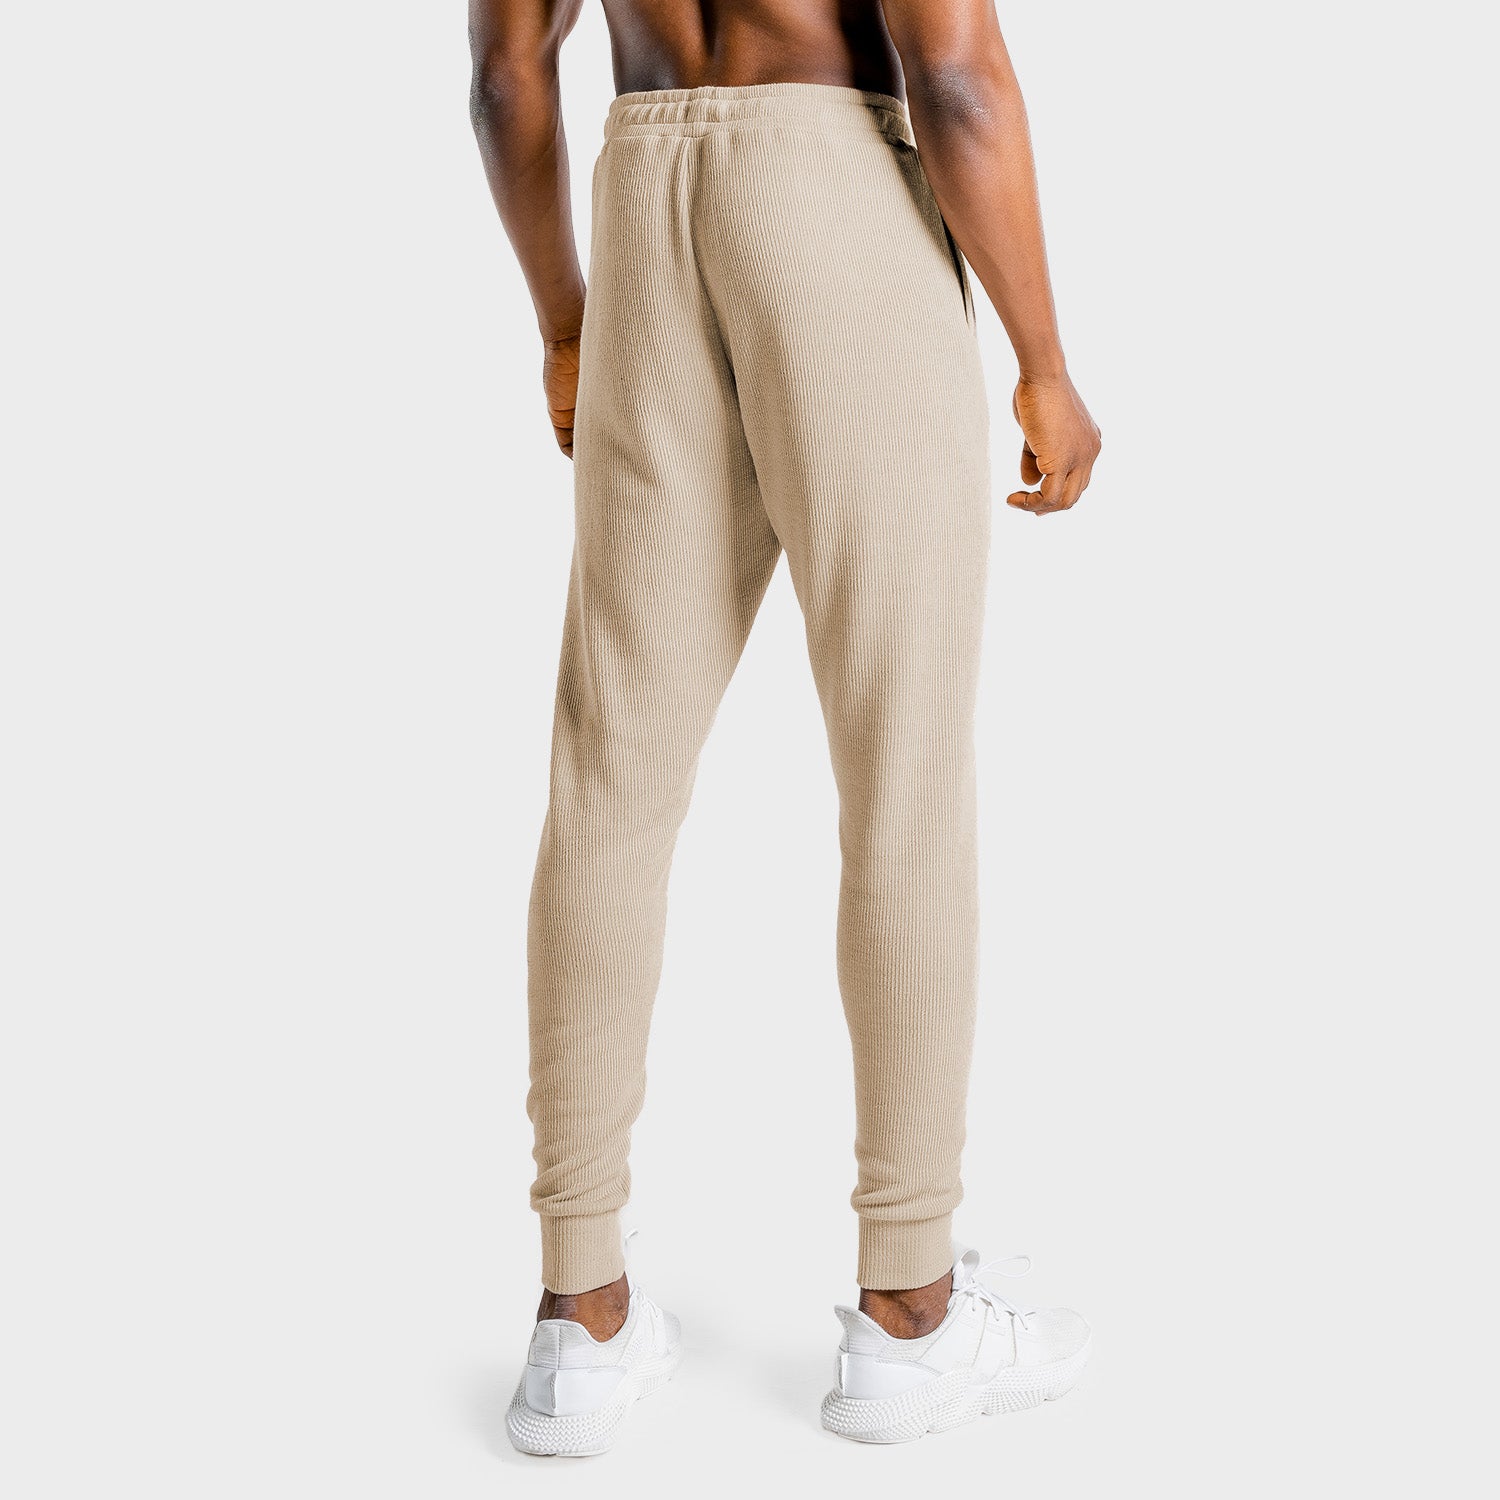 squatwolf-gym-wear-luxe-joggers-stone-workout-pants-for-men